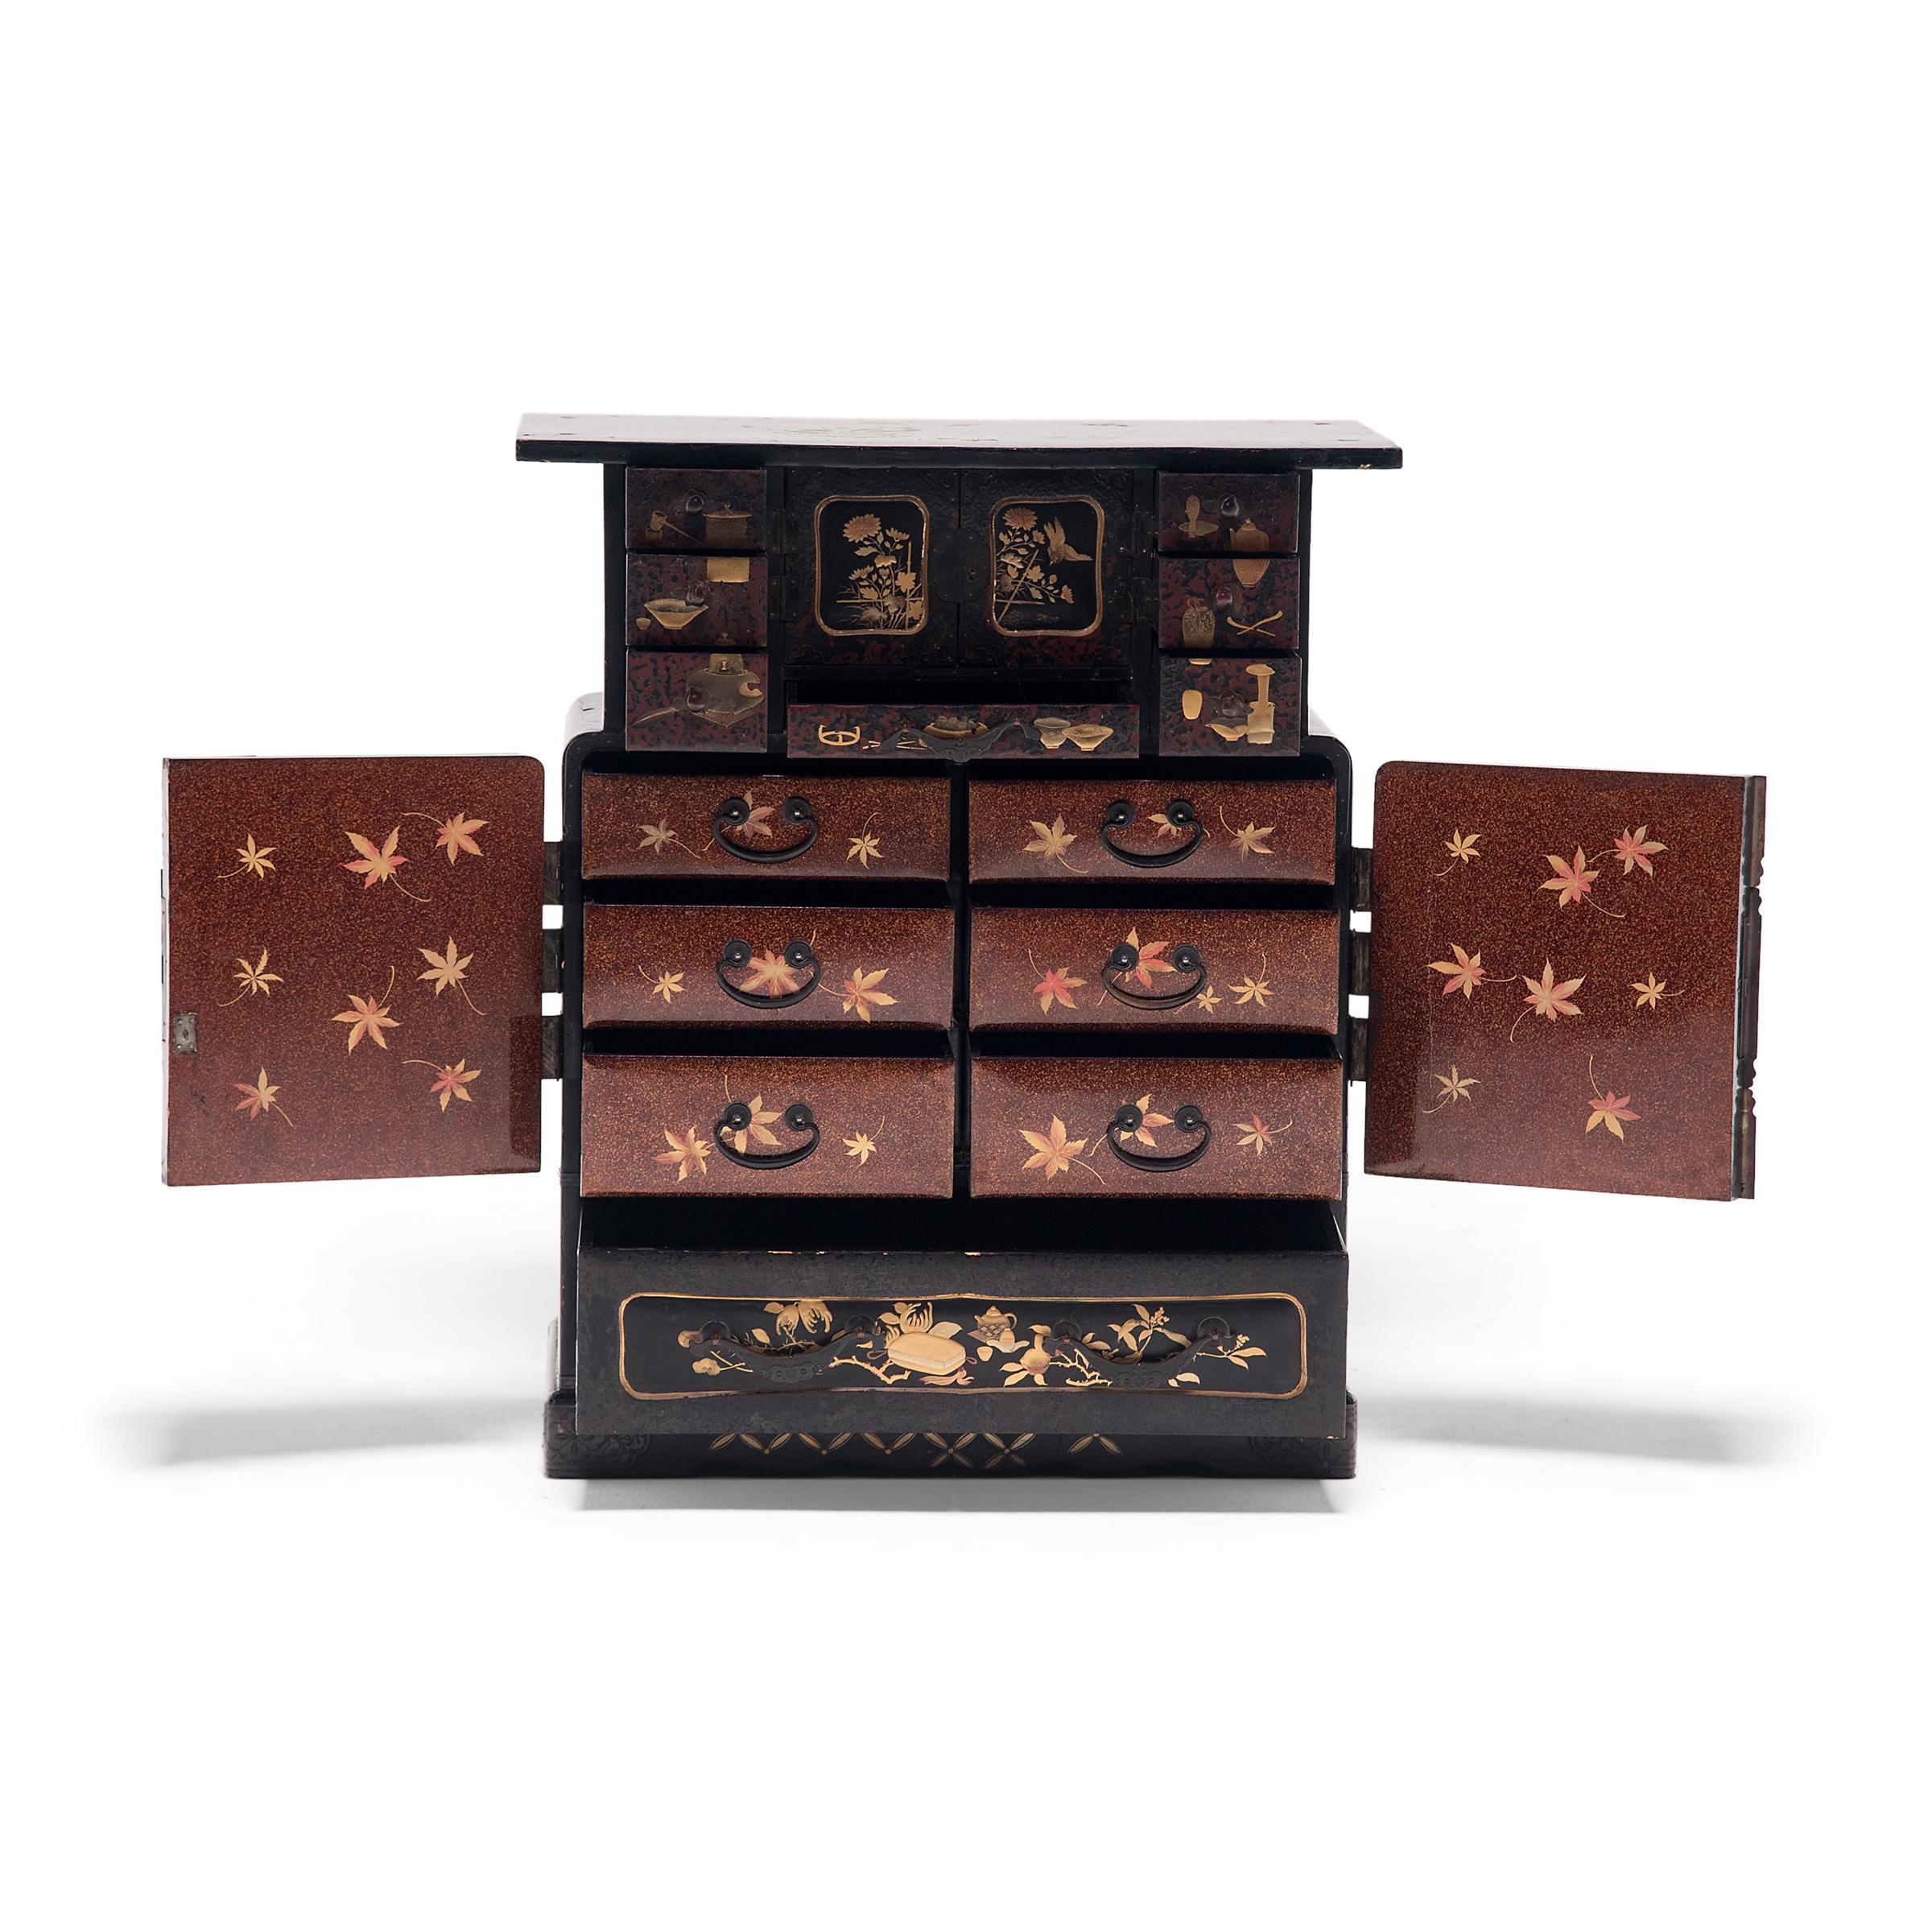 With intricate construction and exquisite decoration, this fine tabletop tea chest is a true masterpiece of Japanese cabinetry and lacquerware. Decorated in gilt with cartouches enclosing birds and maple branches, the mid-section doors enclose